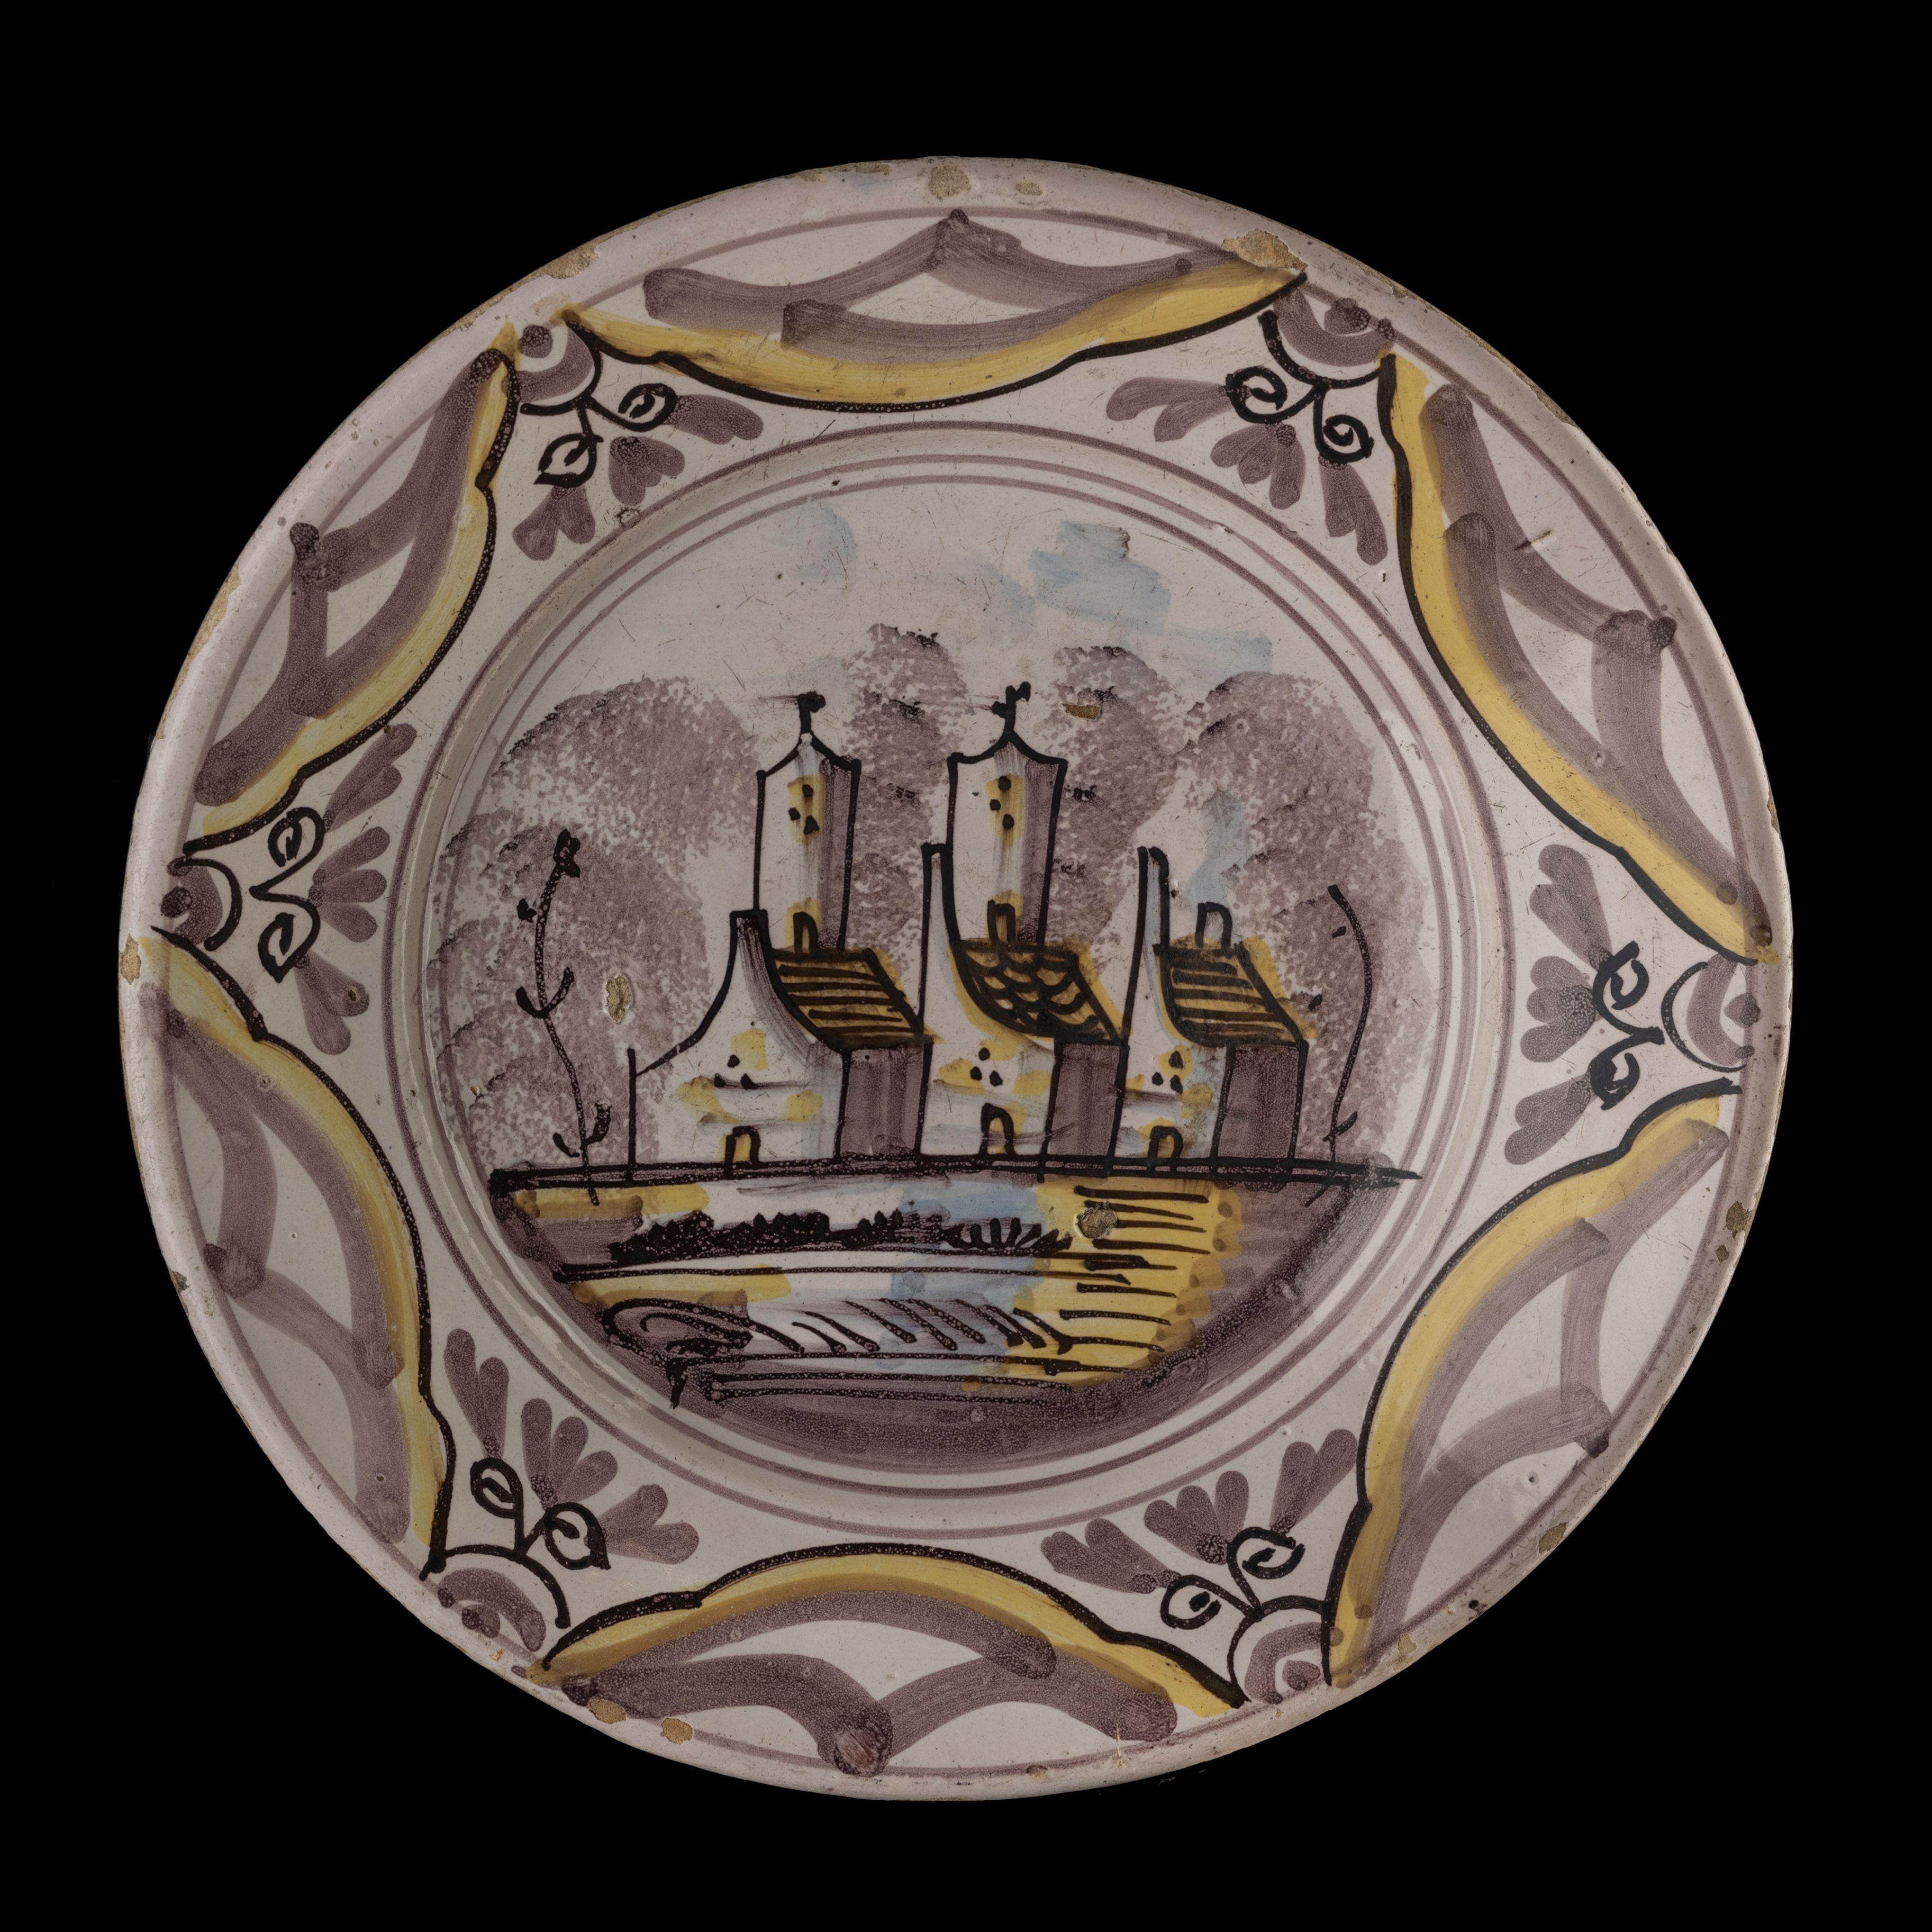 Polychrome dish with a village view The Netherlands, 1675-1725.

The dish has a spreading, slightly raised flange and is painted in blue, purple and yellow with a simplified village view in a double circle. A ornamental decor of arched segments